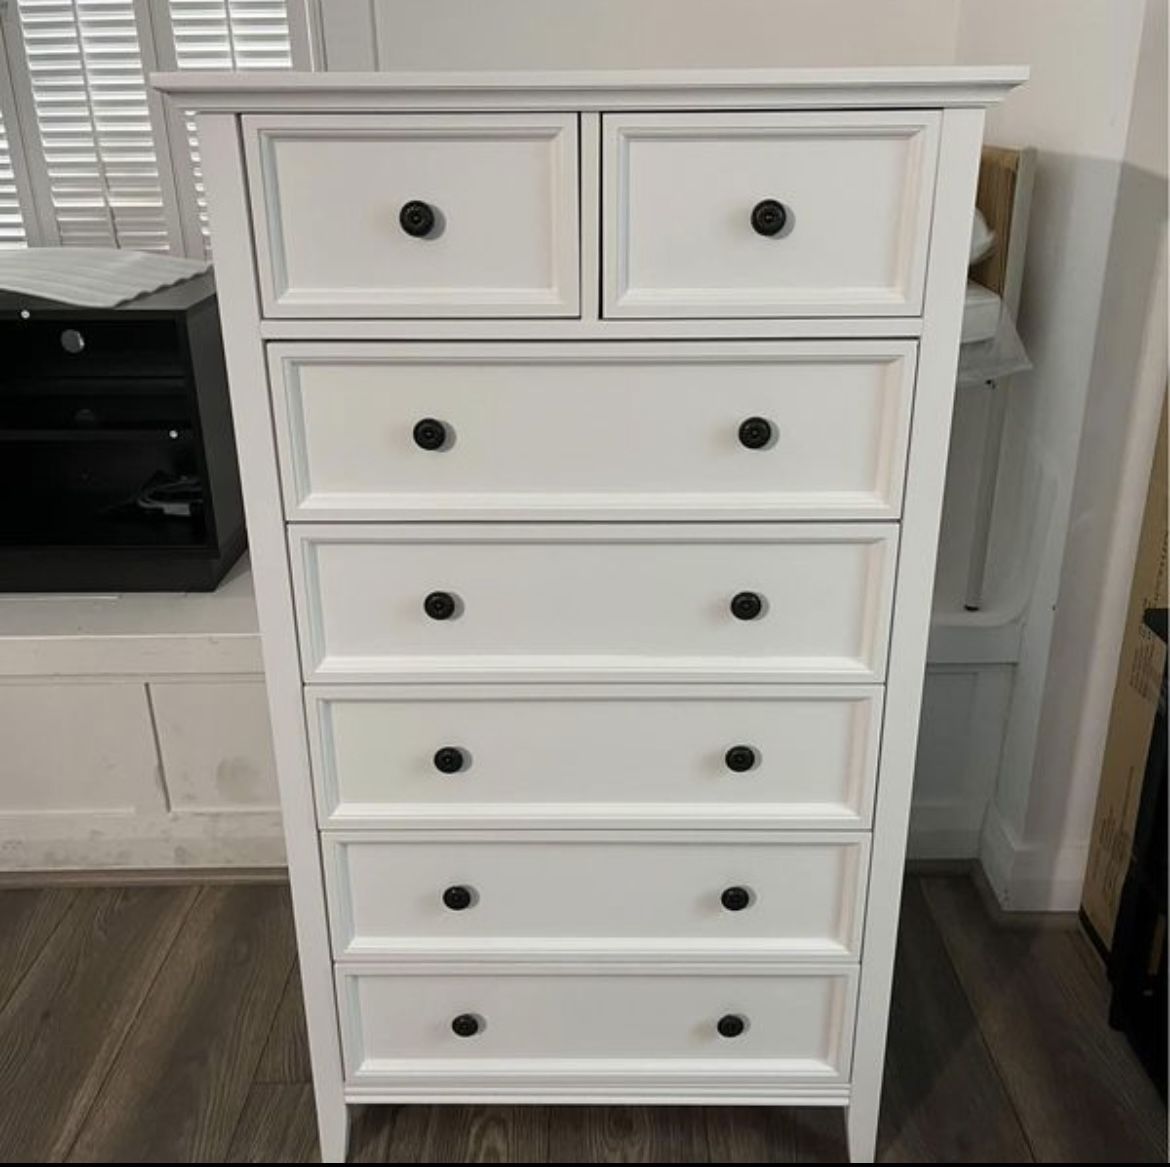 7 Drawer Tall Dresser, Tall Solid Wood Large Storage Cabinet, Modern Simple White Tall Chest of Drawer for Bedroom Living Room Hallway Entryway (White